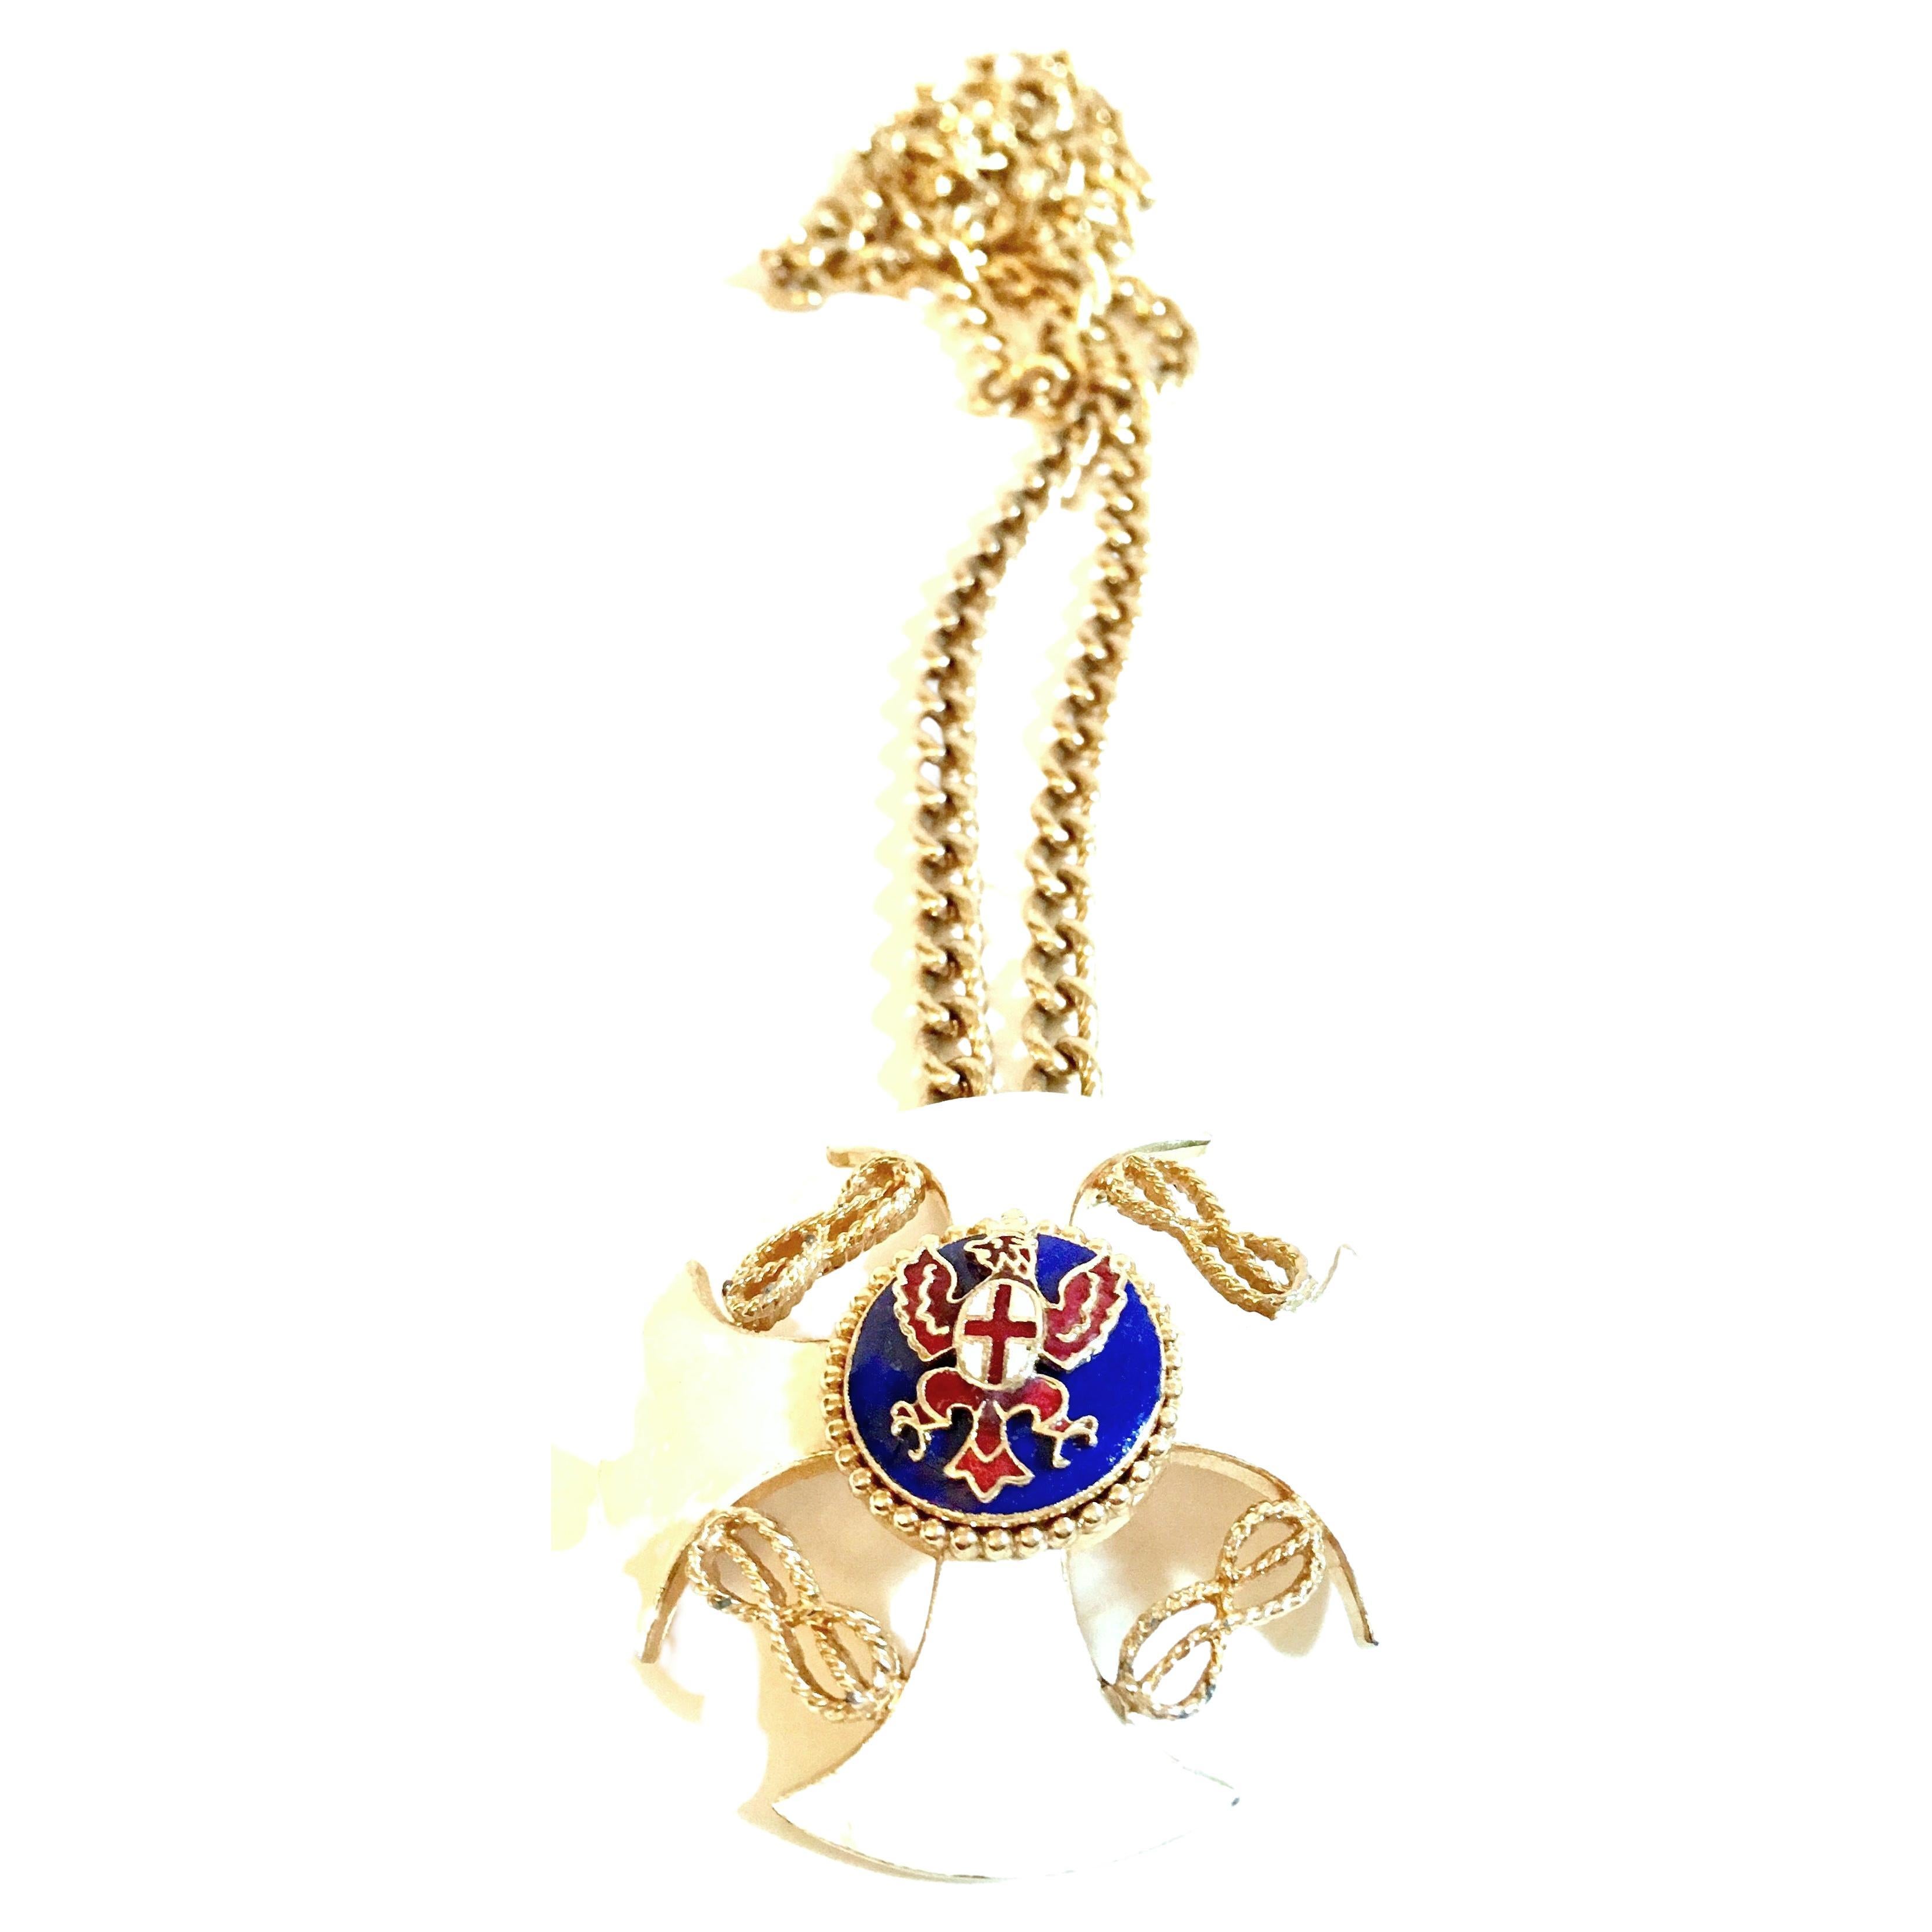 20th Century Gold & Enamel Crest Cross Brooch & Pendant Opera Length Necklace By, Monet. This gold plate opera chain link necklace features a large enameled pendant or brooch with a curved nautical themed cross with gold rope and bead detail. The